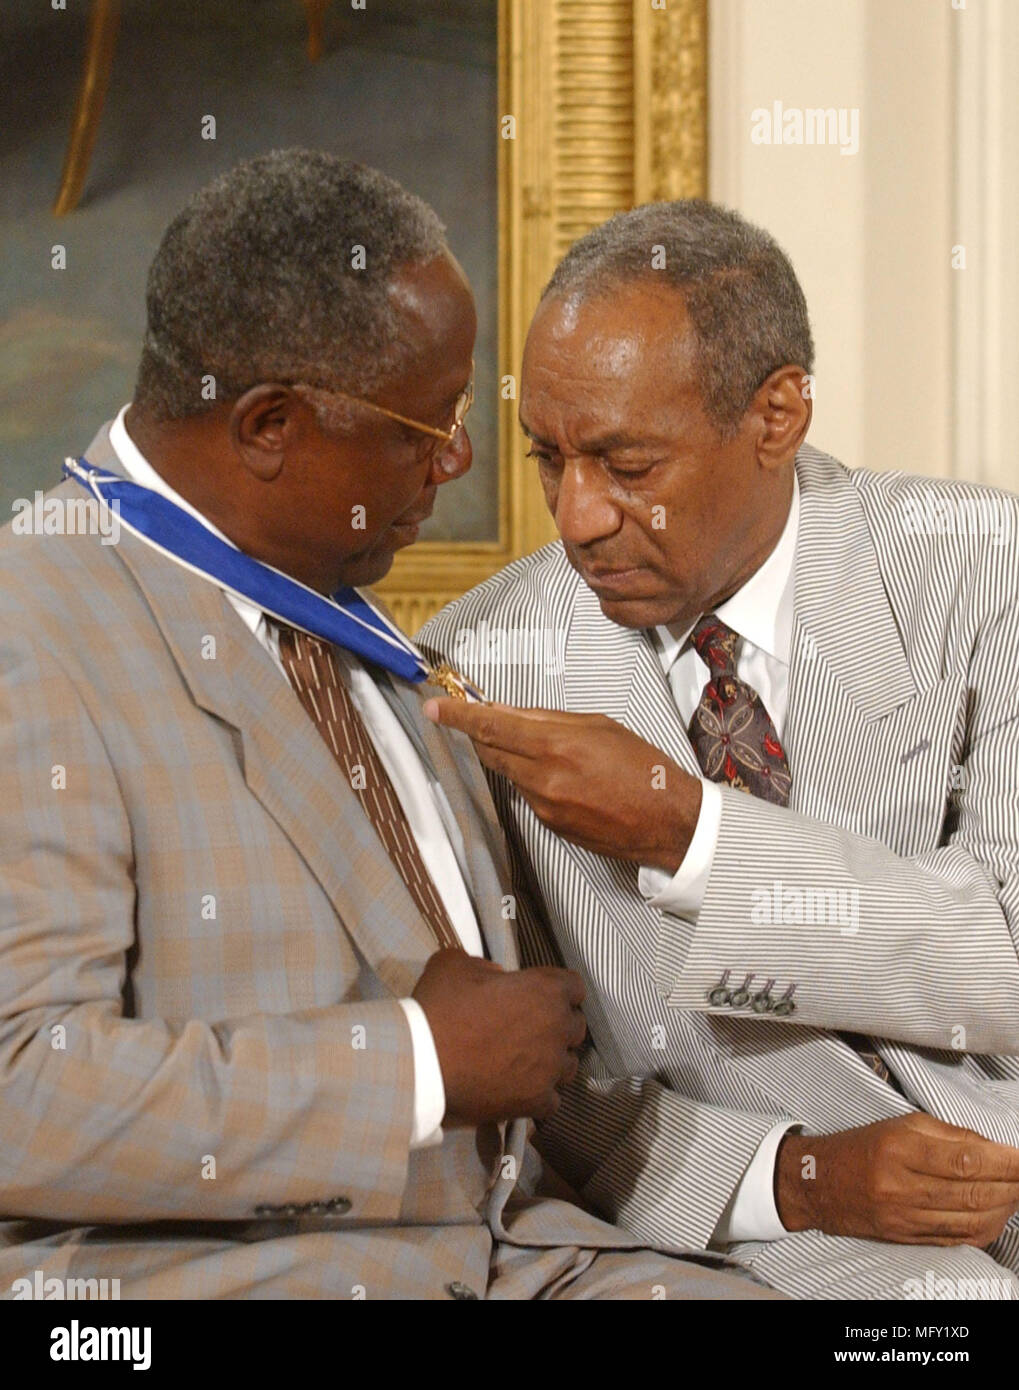 Washington, USA. 09th July, 2002. FILED - Bill Cosby admires Hank Aaron's Presidential Medal of Freedom which was awarded by United States President George W. Bush during a ceremony in the East Room of the White House in Washington, DC on July 9, 2002.Credit: Ron Sachs/CNP - NO WIRE SERVICE · Credit: Ron Sachs/Consolidated News Photos/Ron Sachs/CNP/dpa/Alamy Live News Stock Photo